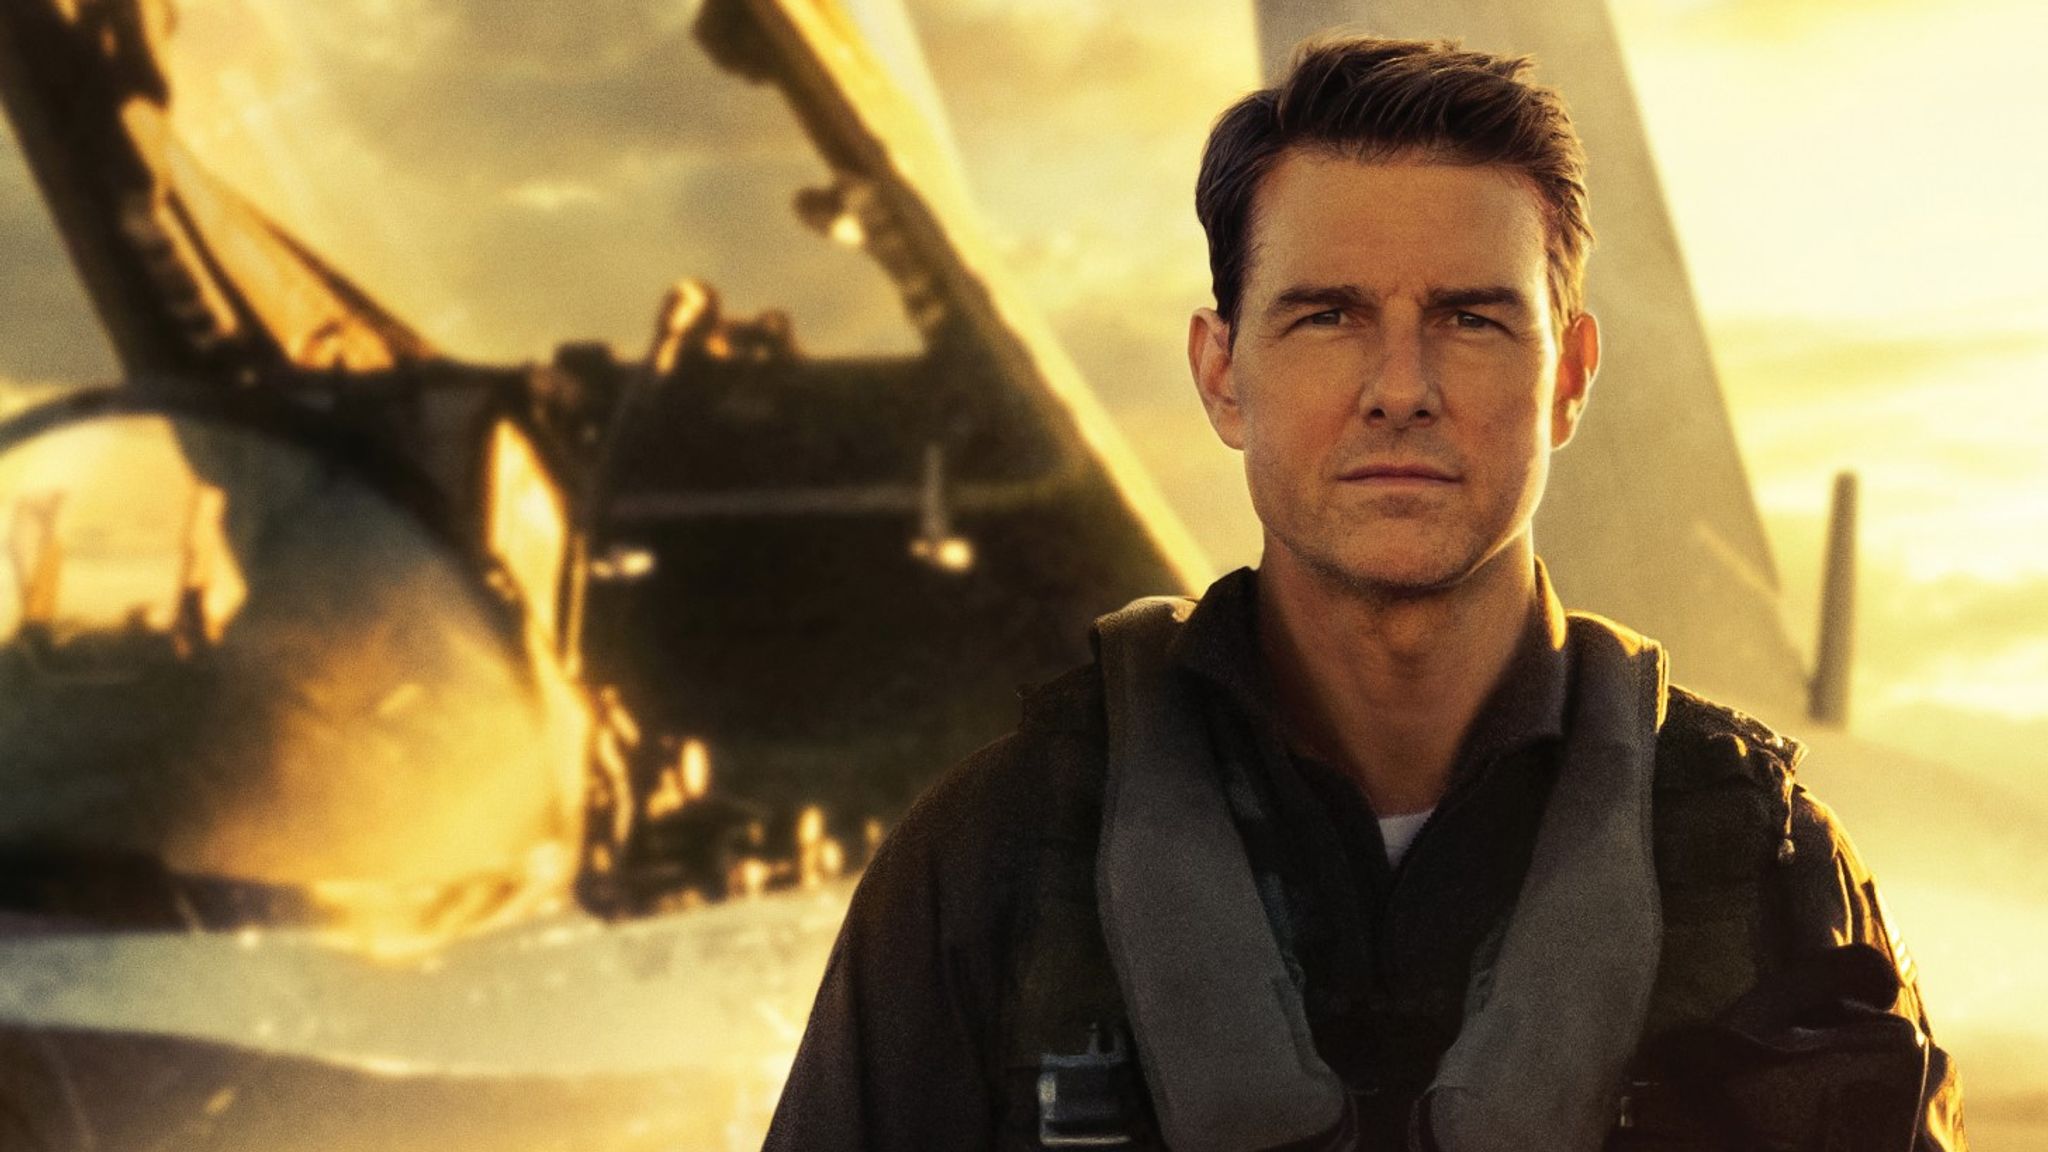 Top Gun: Maverick soars past Tom Cruise box office record with huge opening  weekend | Ents & Arts News | Sky News